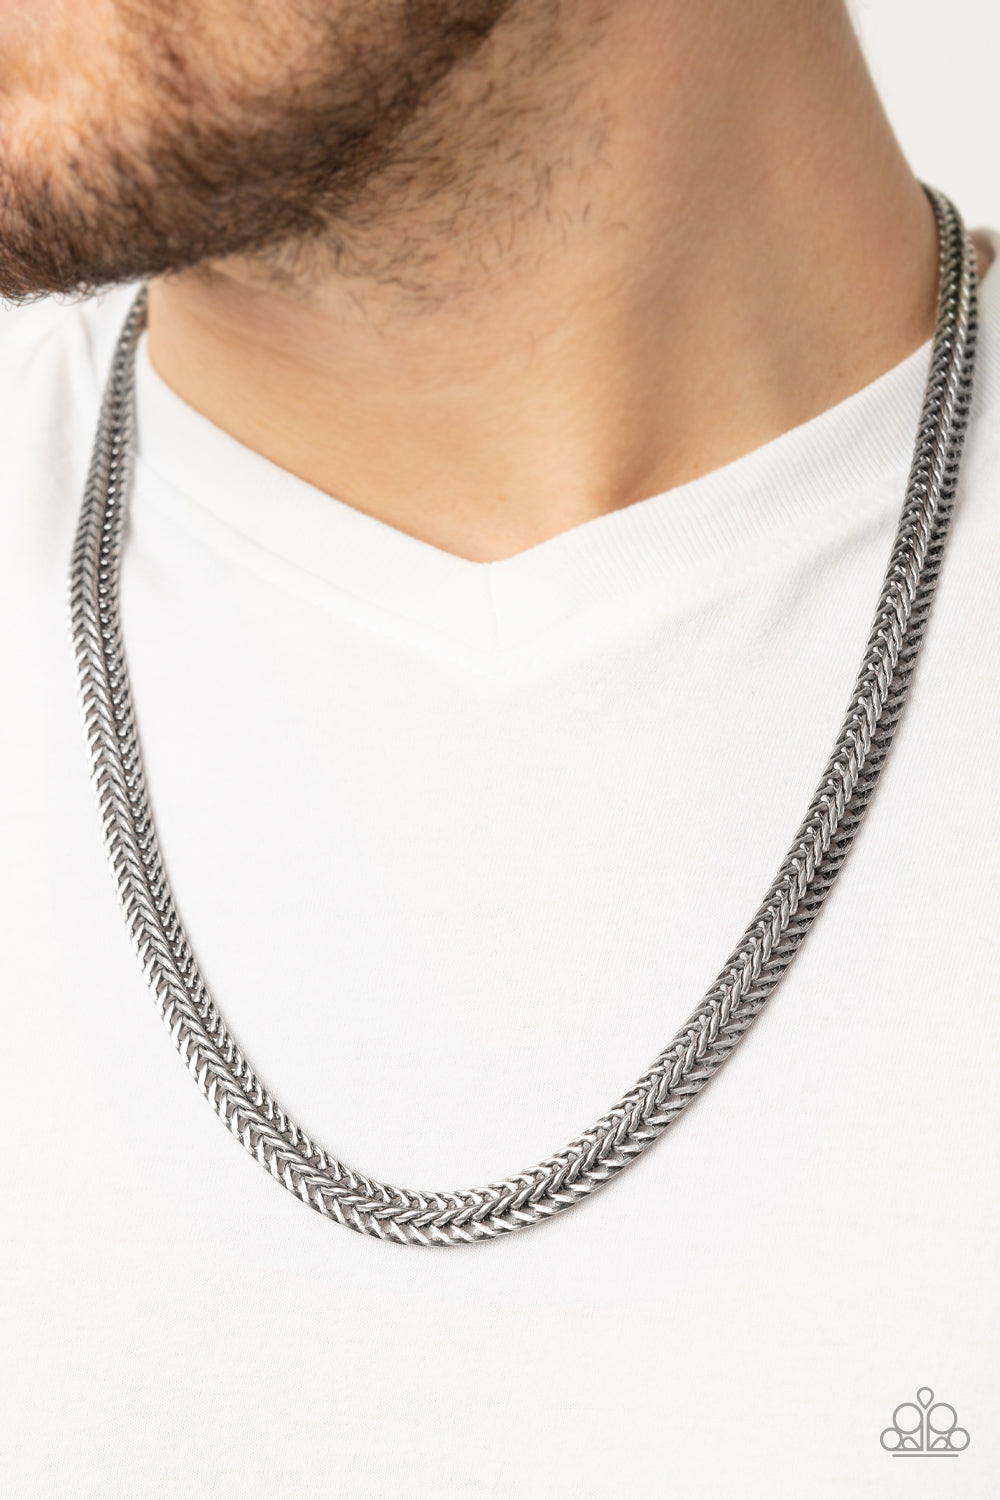 - Modern Paparazzi Sugar Necklace – and Motorhead Bee Chain Accessories Urban Jewelry Silver - Bling